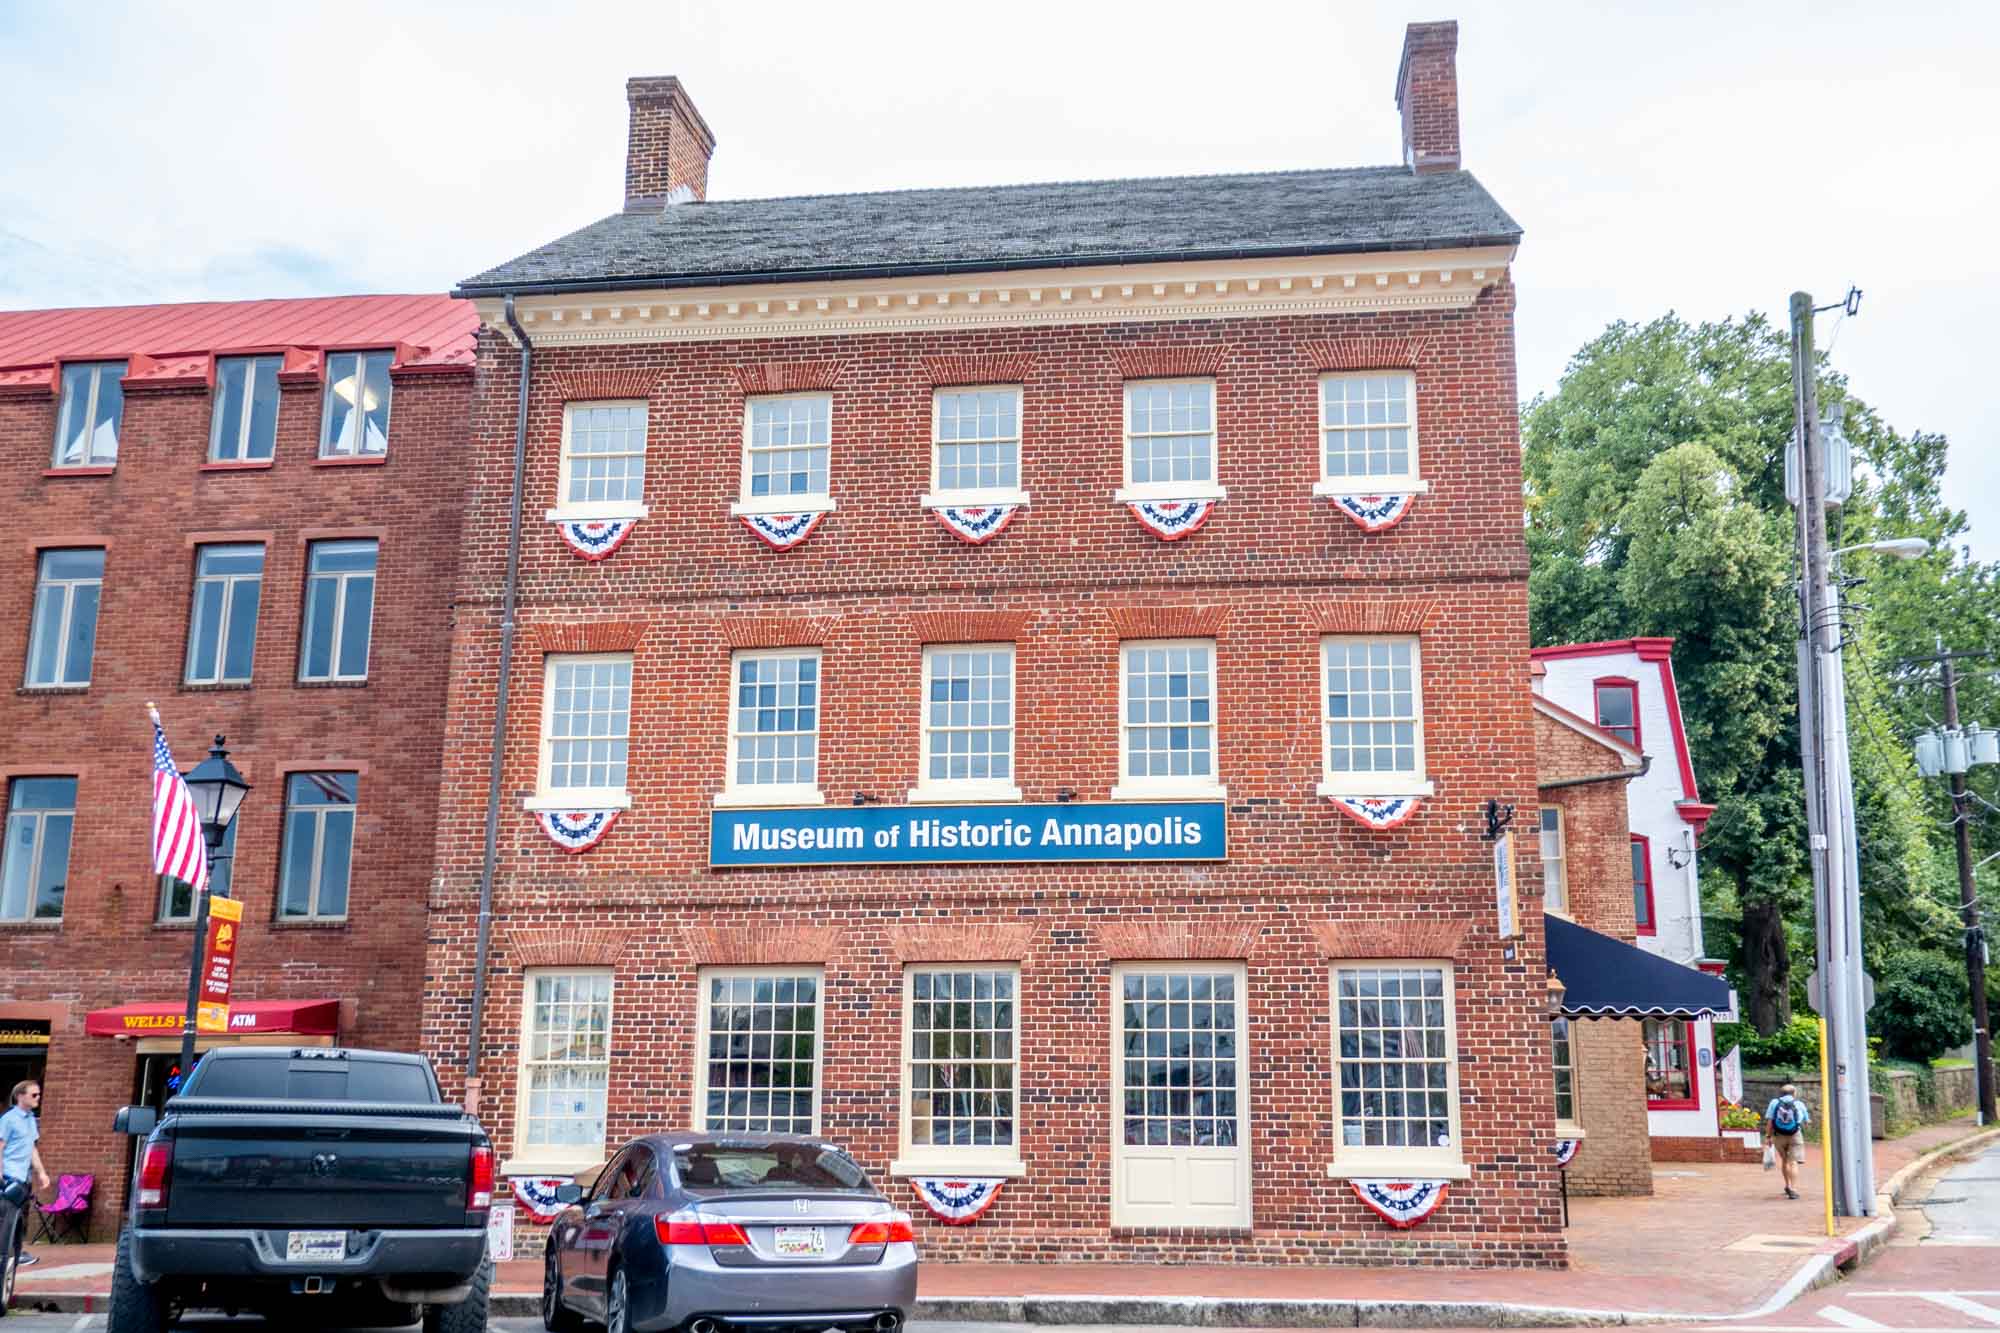 3-story brick building with rows of windows and a sign for "Museum of Historic Annapolis"